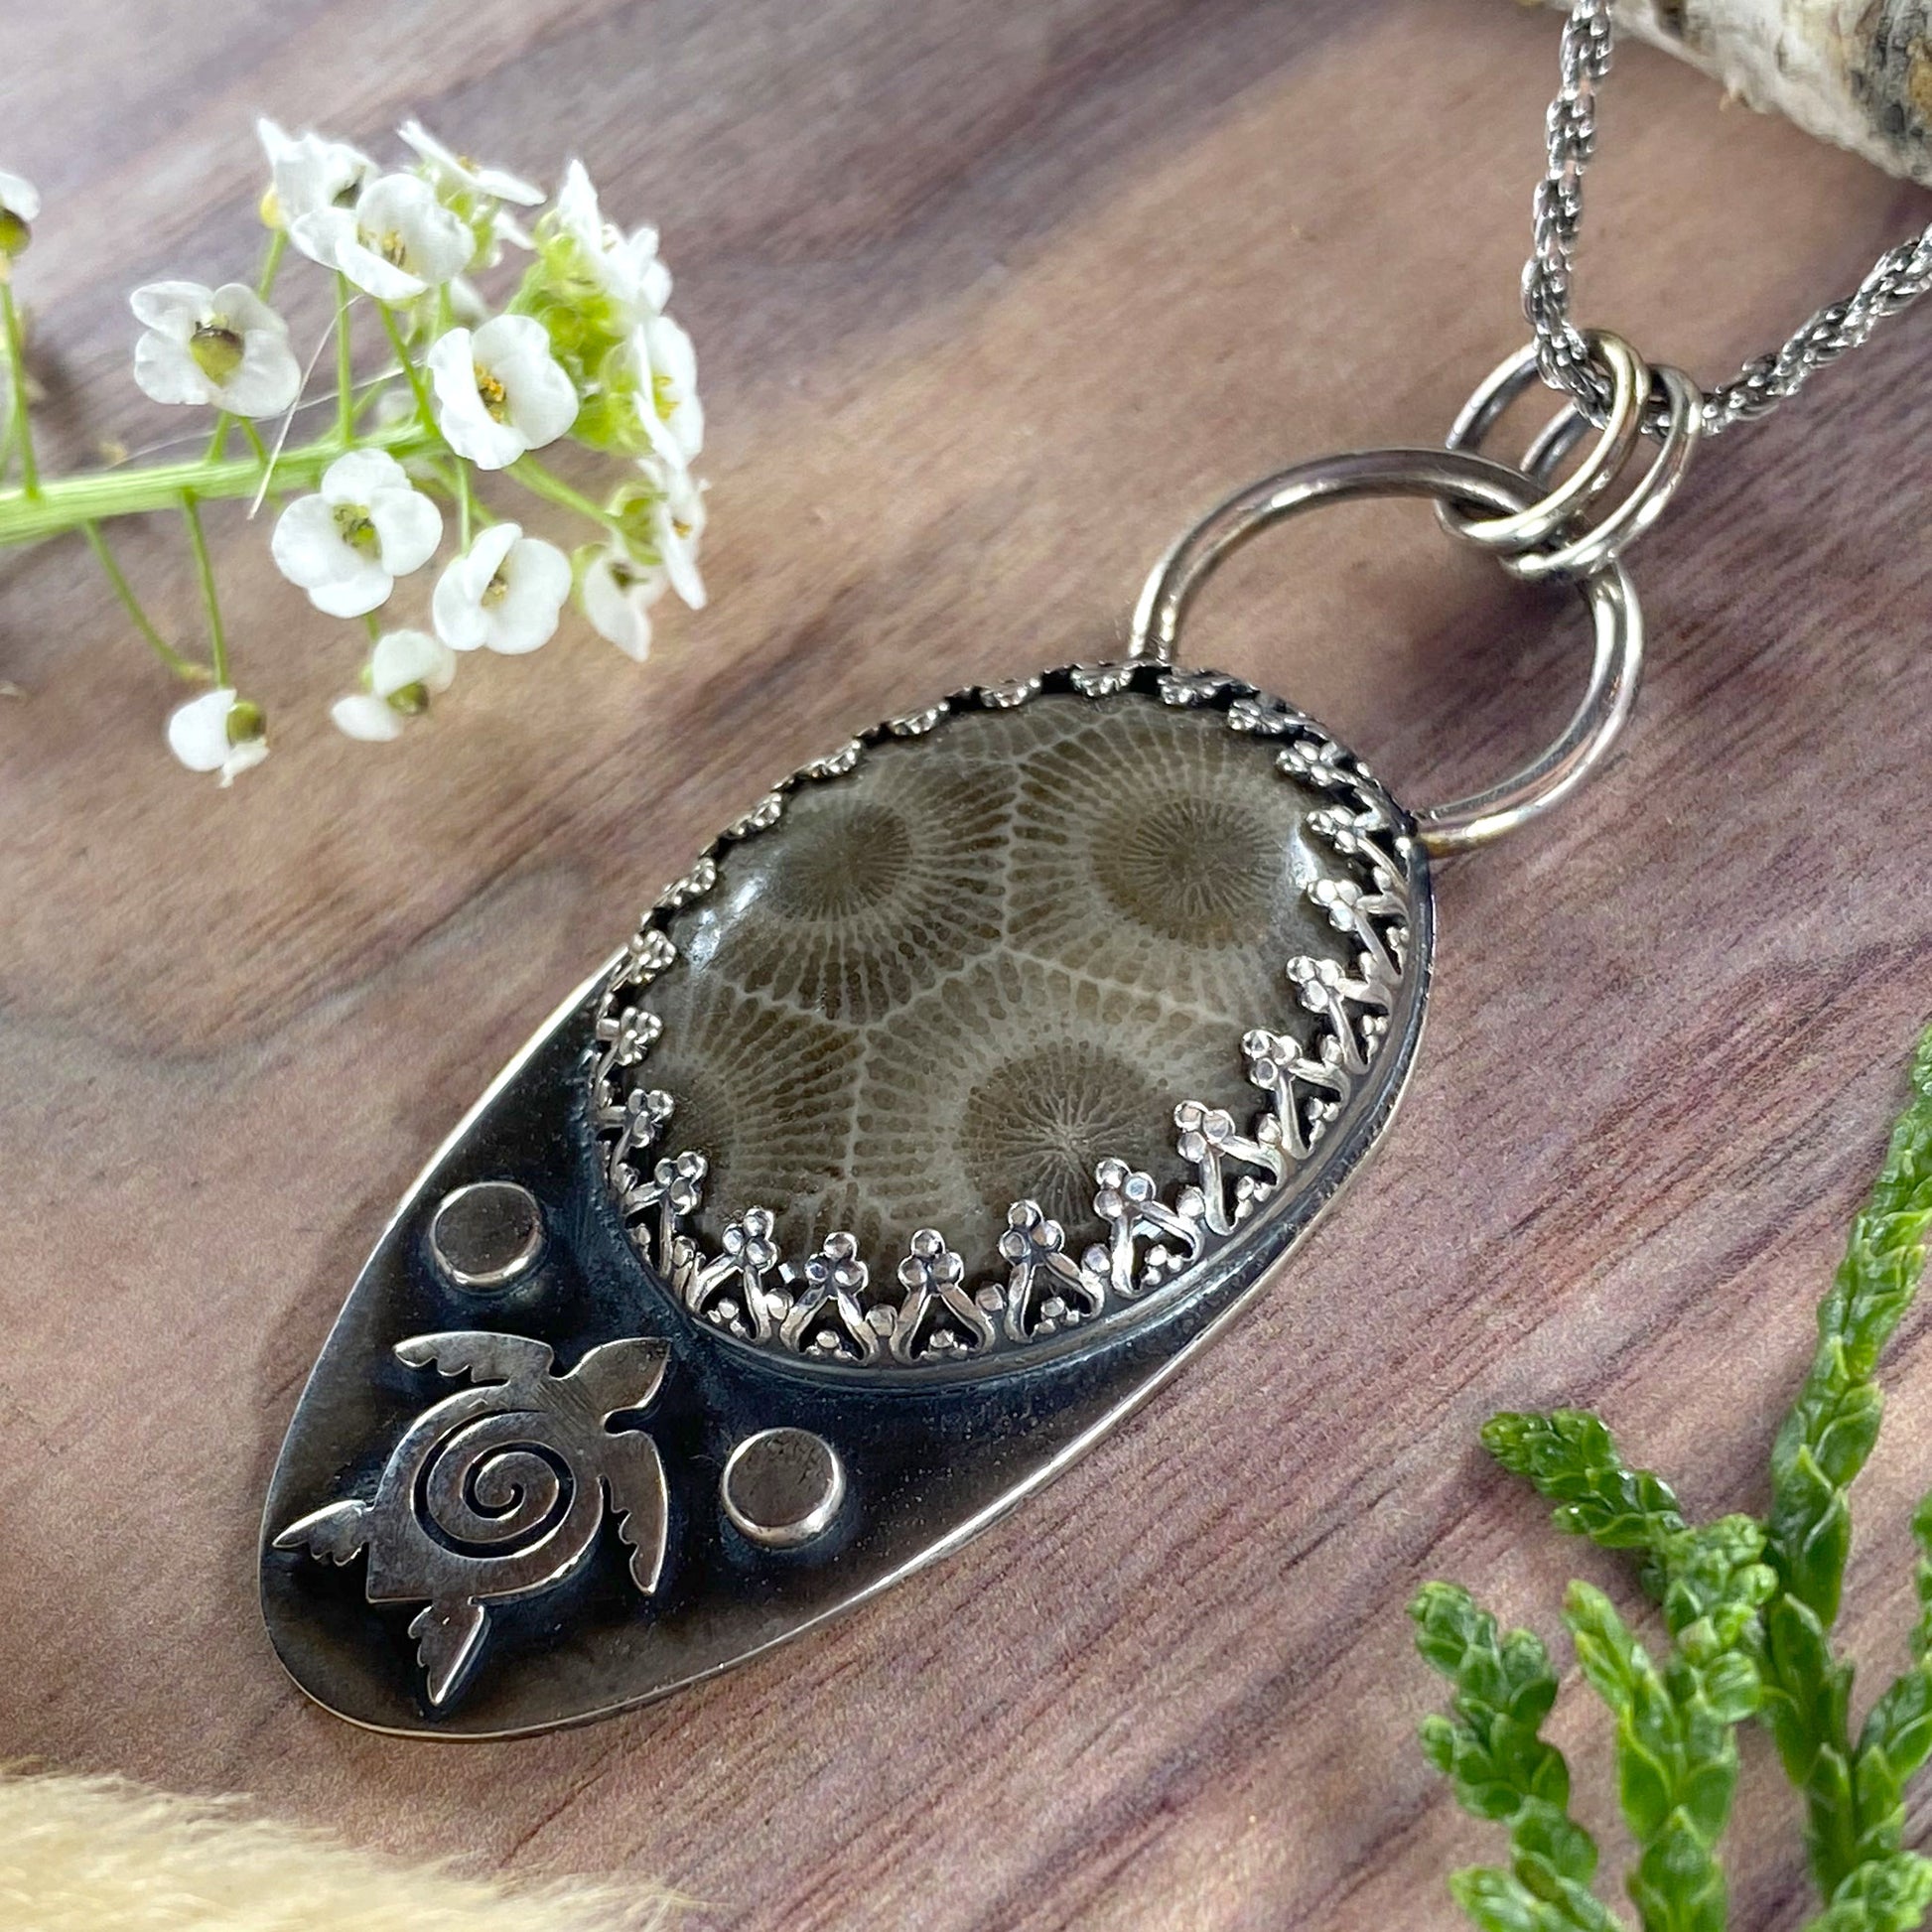 Petoskey Stone with Turtle Pendant Necklace Front View III - Stone Treasures by the Lake